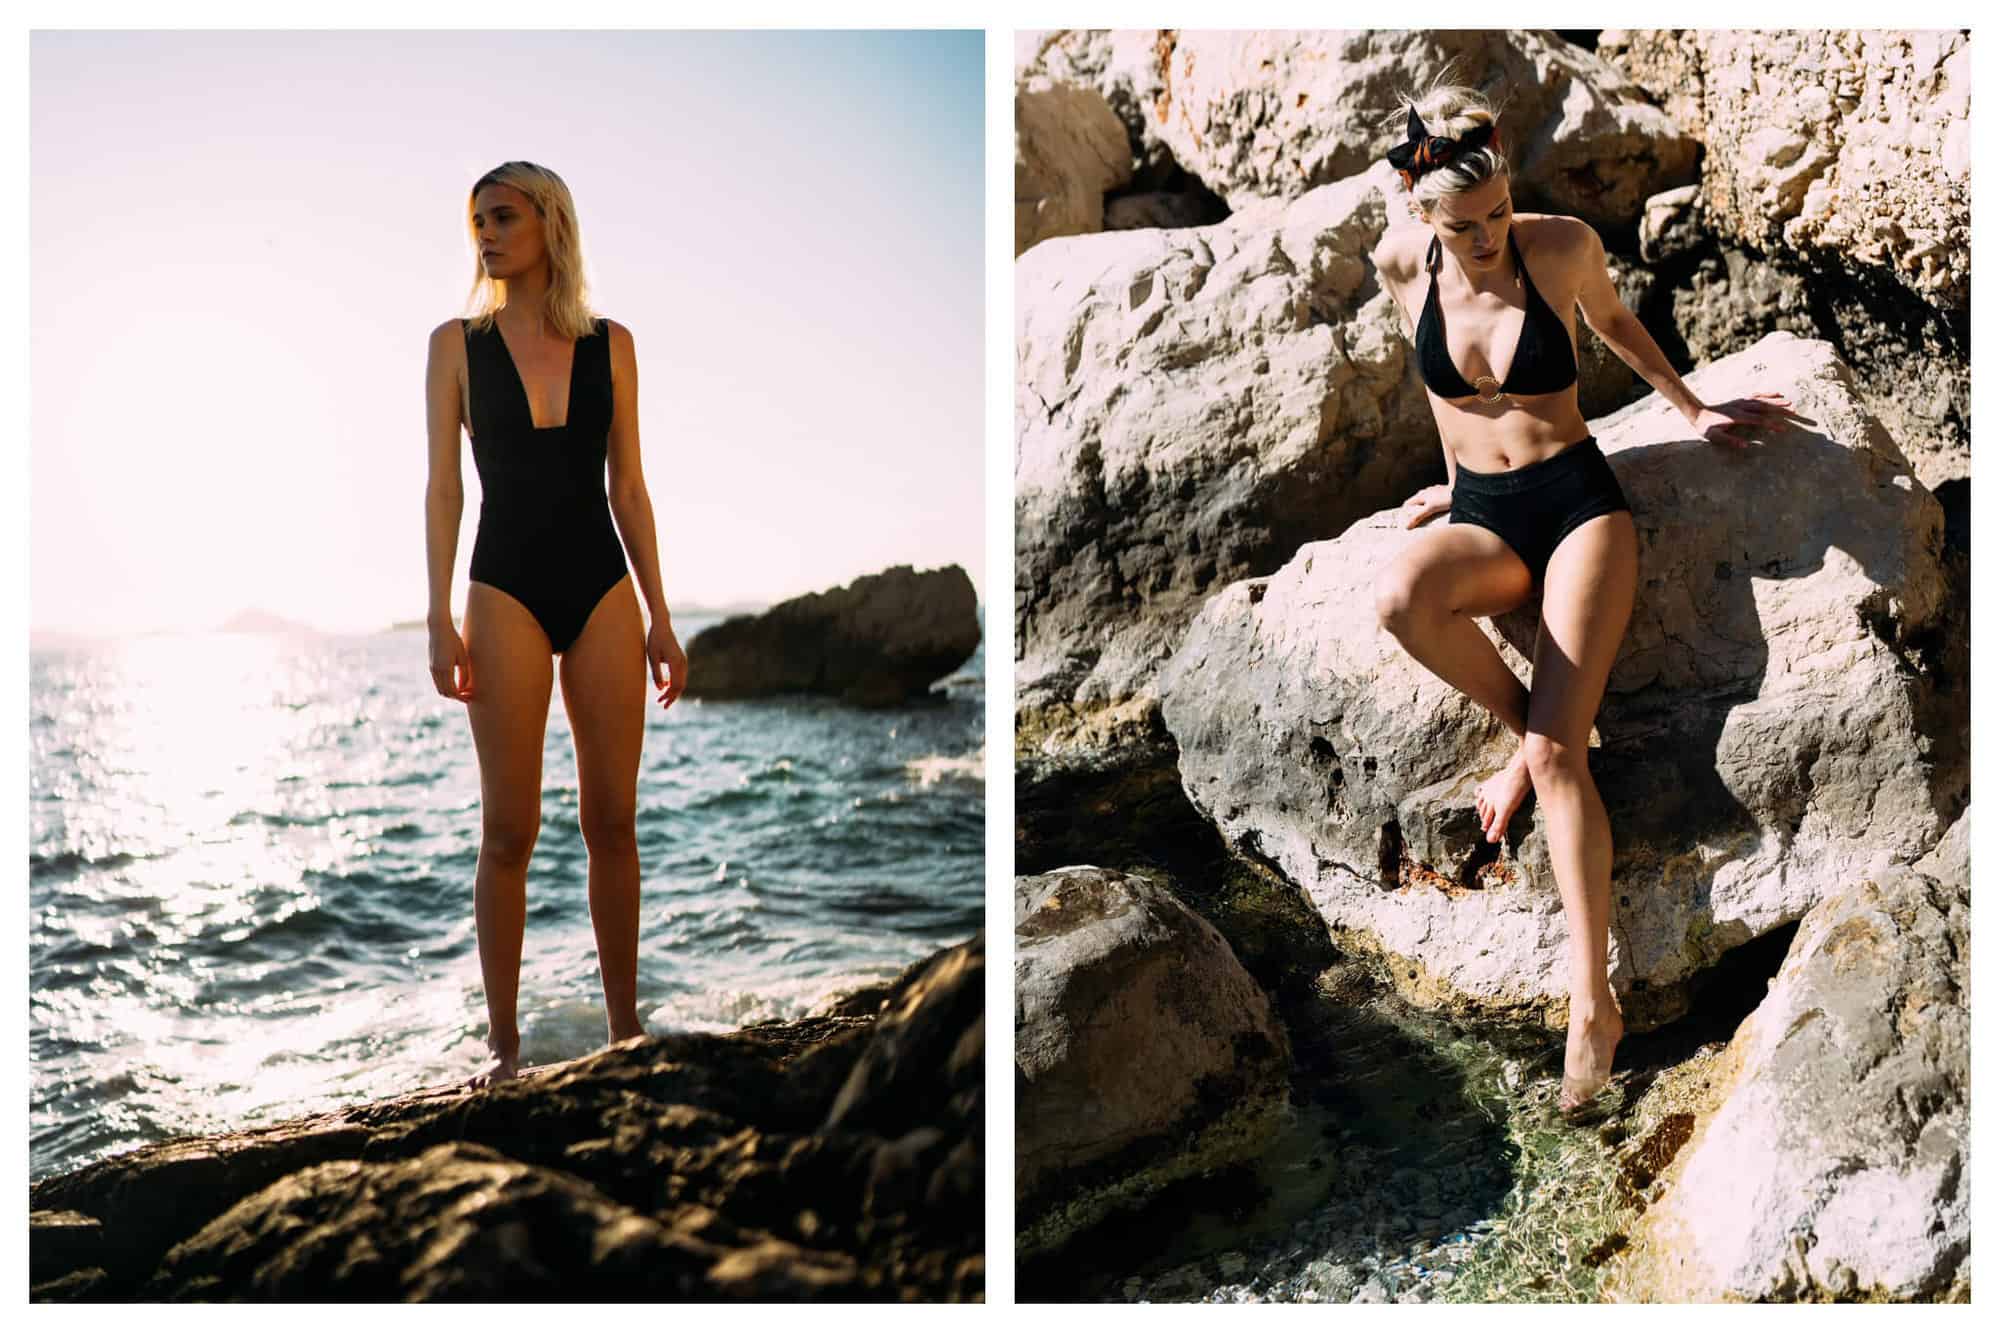 Left: a woman standing on rocks by the ocean wearing a black one-piece swimsuit by Livystone. Right: a woman stepping off rocks into the water wearing a black bikini by Livystone.